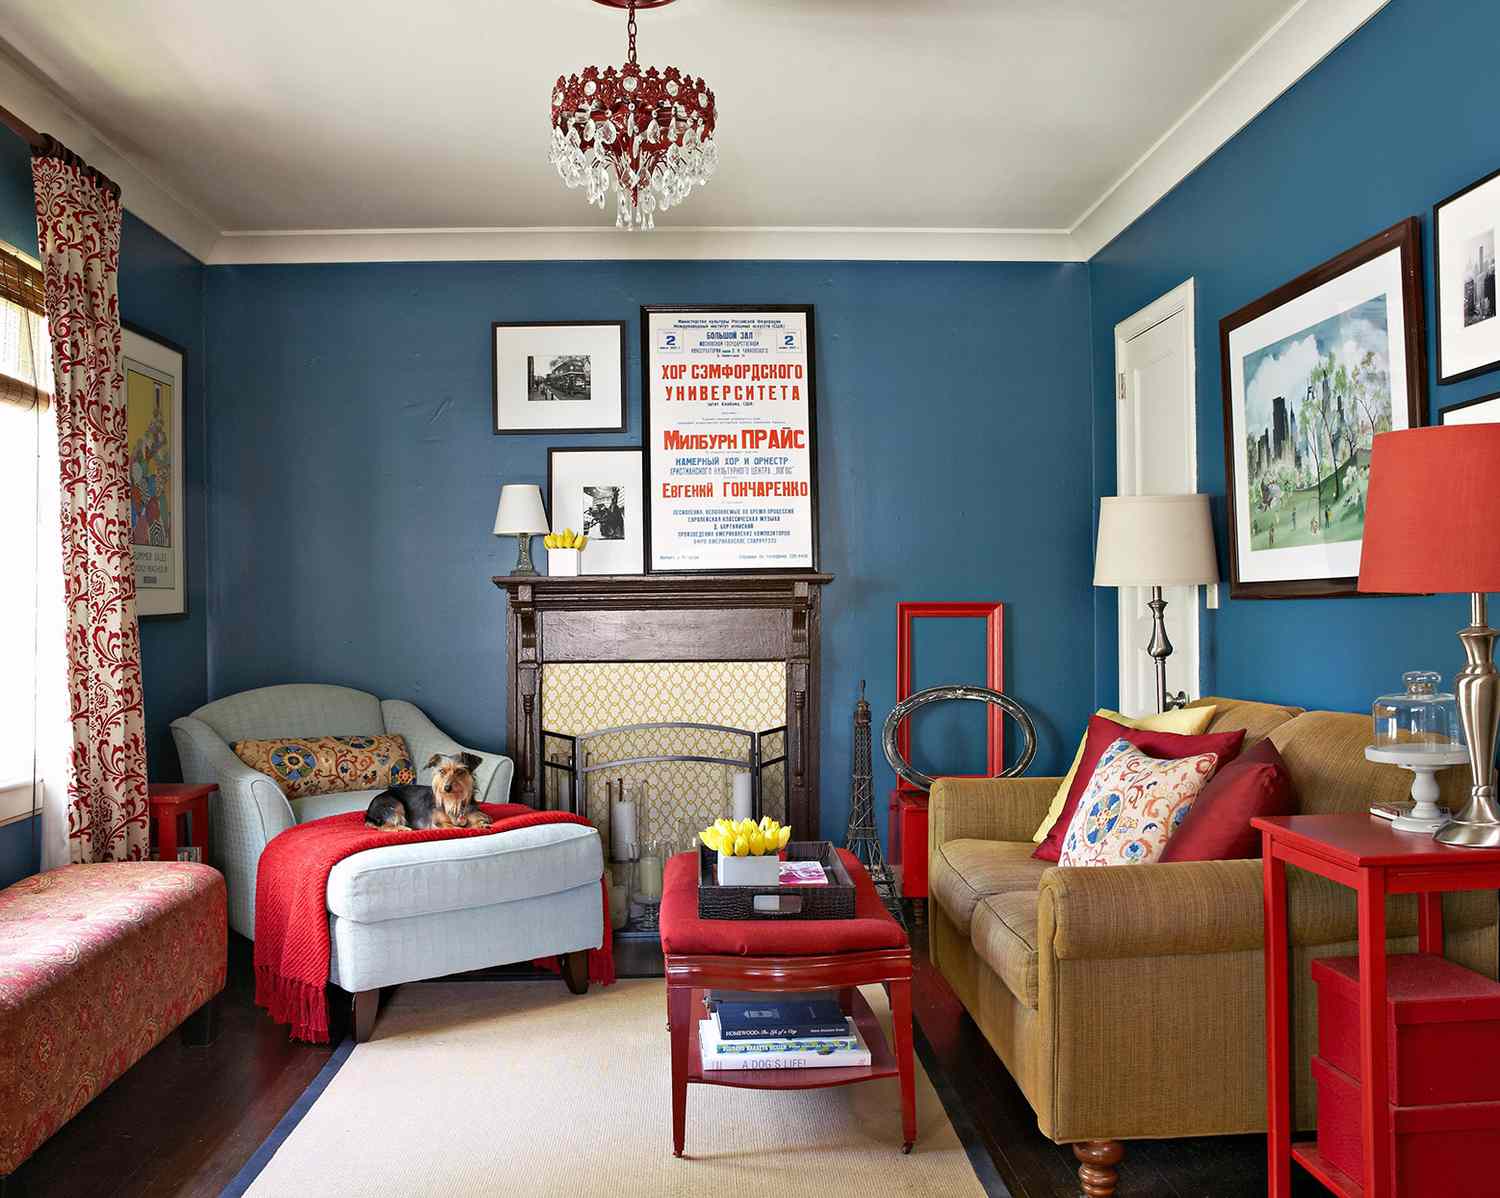 Blue Walls with Red Accents